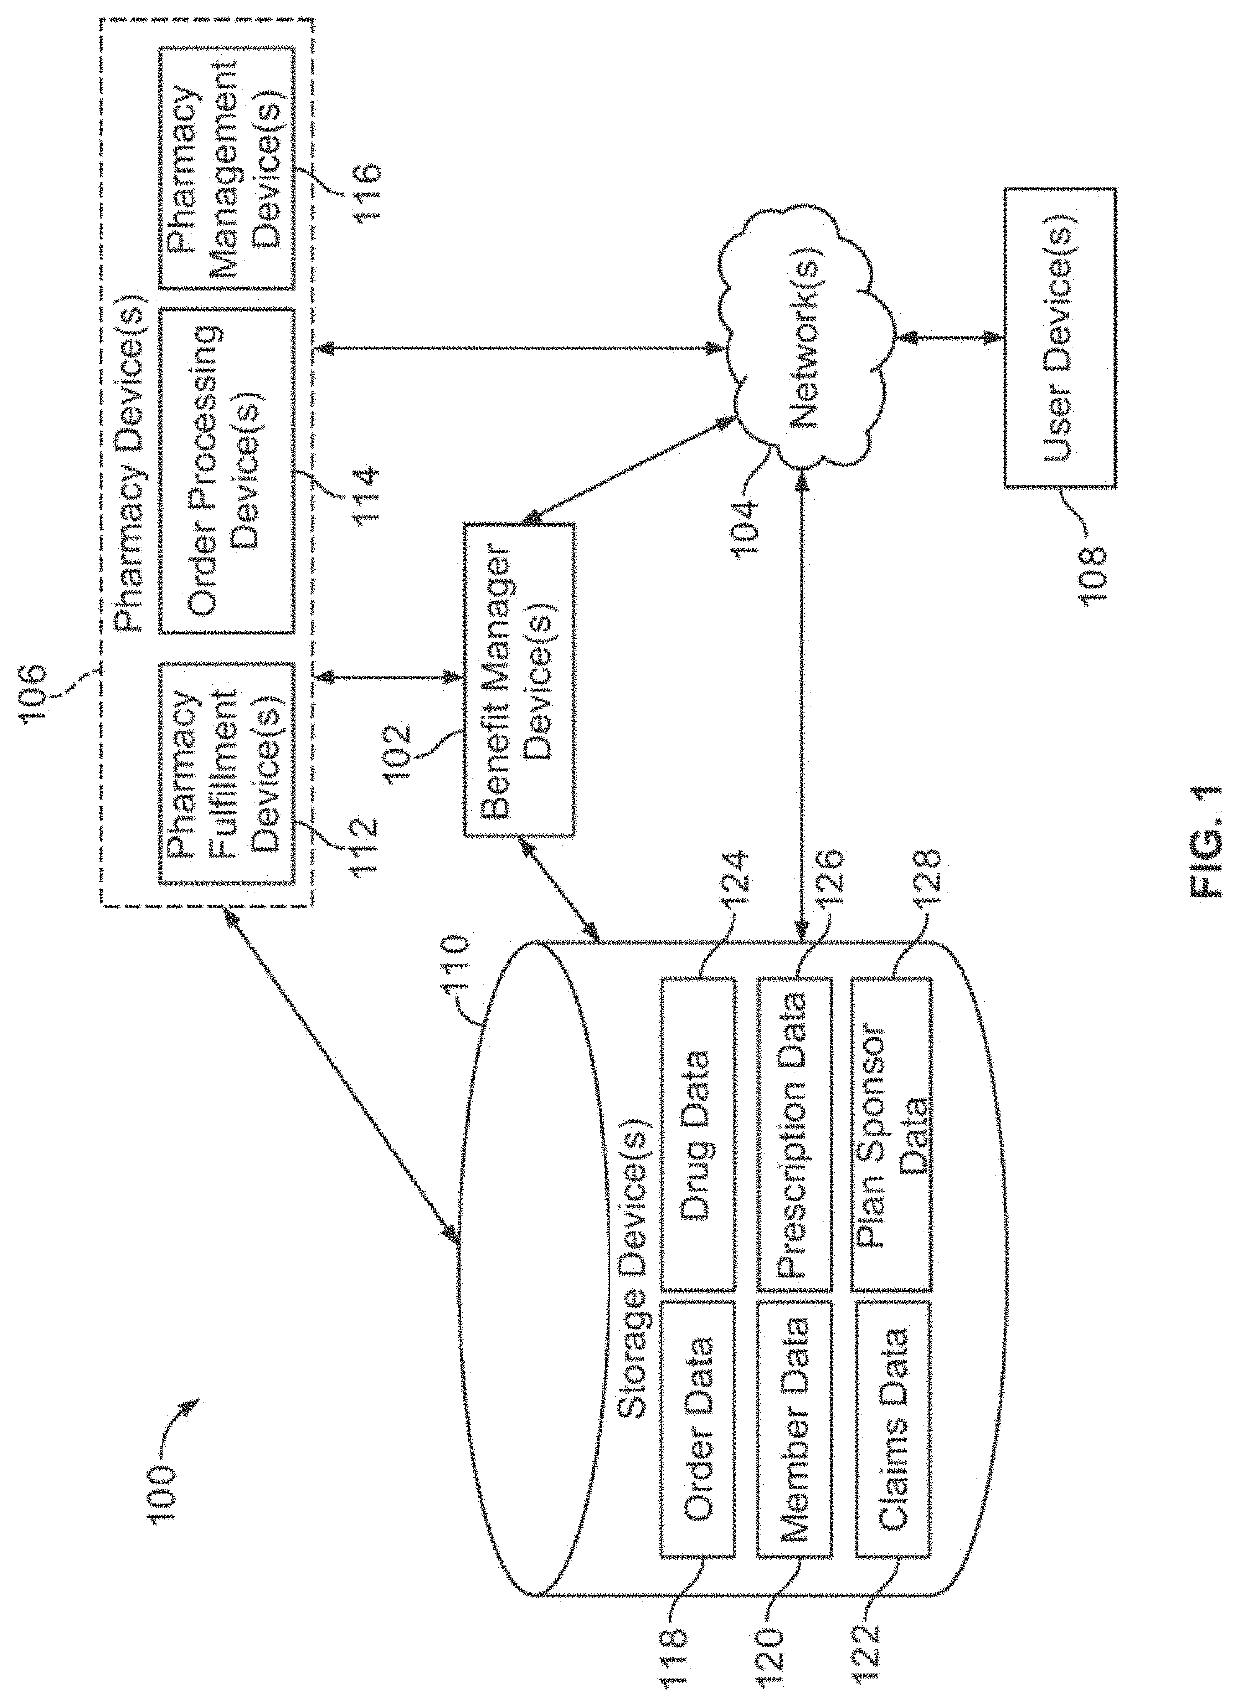 Systems and methods for patient record matching